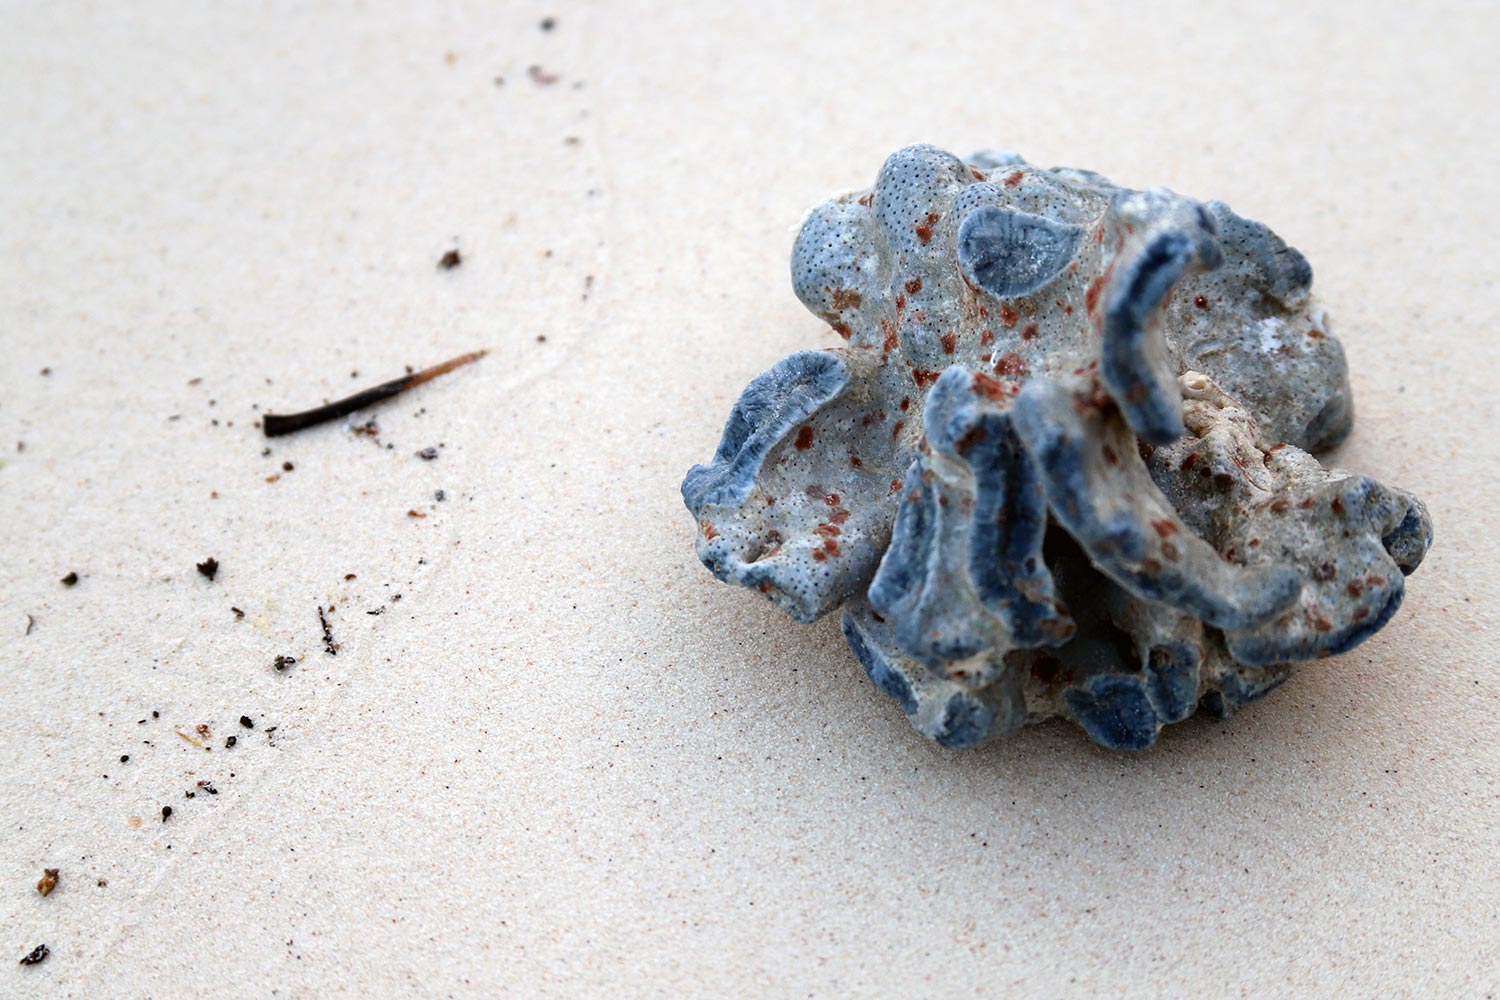 A colorful, blue, red and white hard coral washed up on a sandy beach in Thailand.